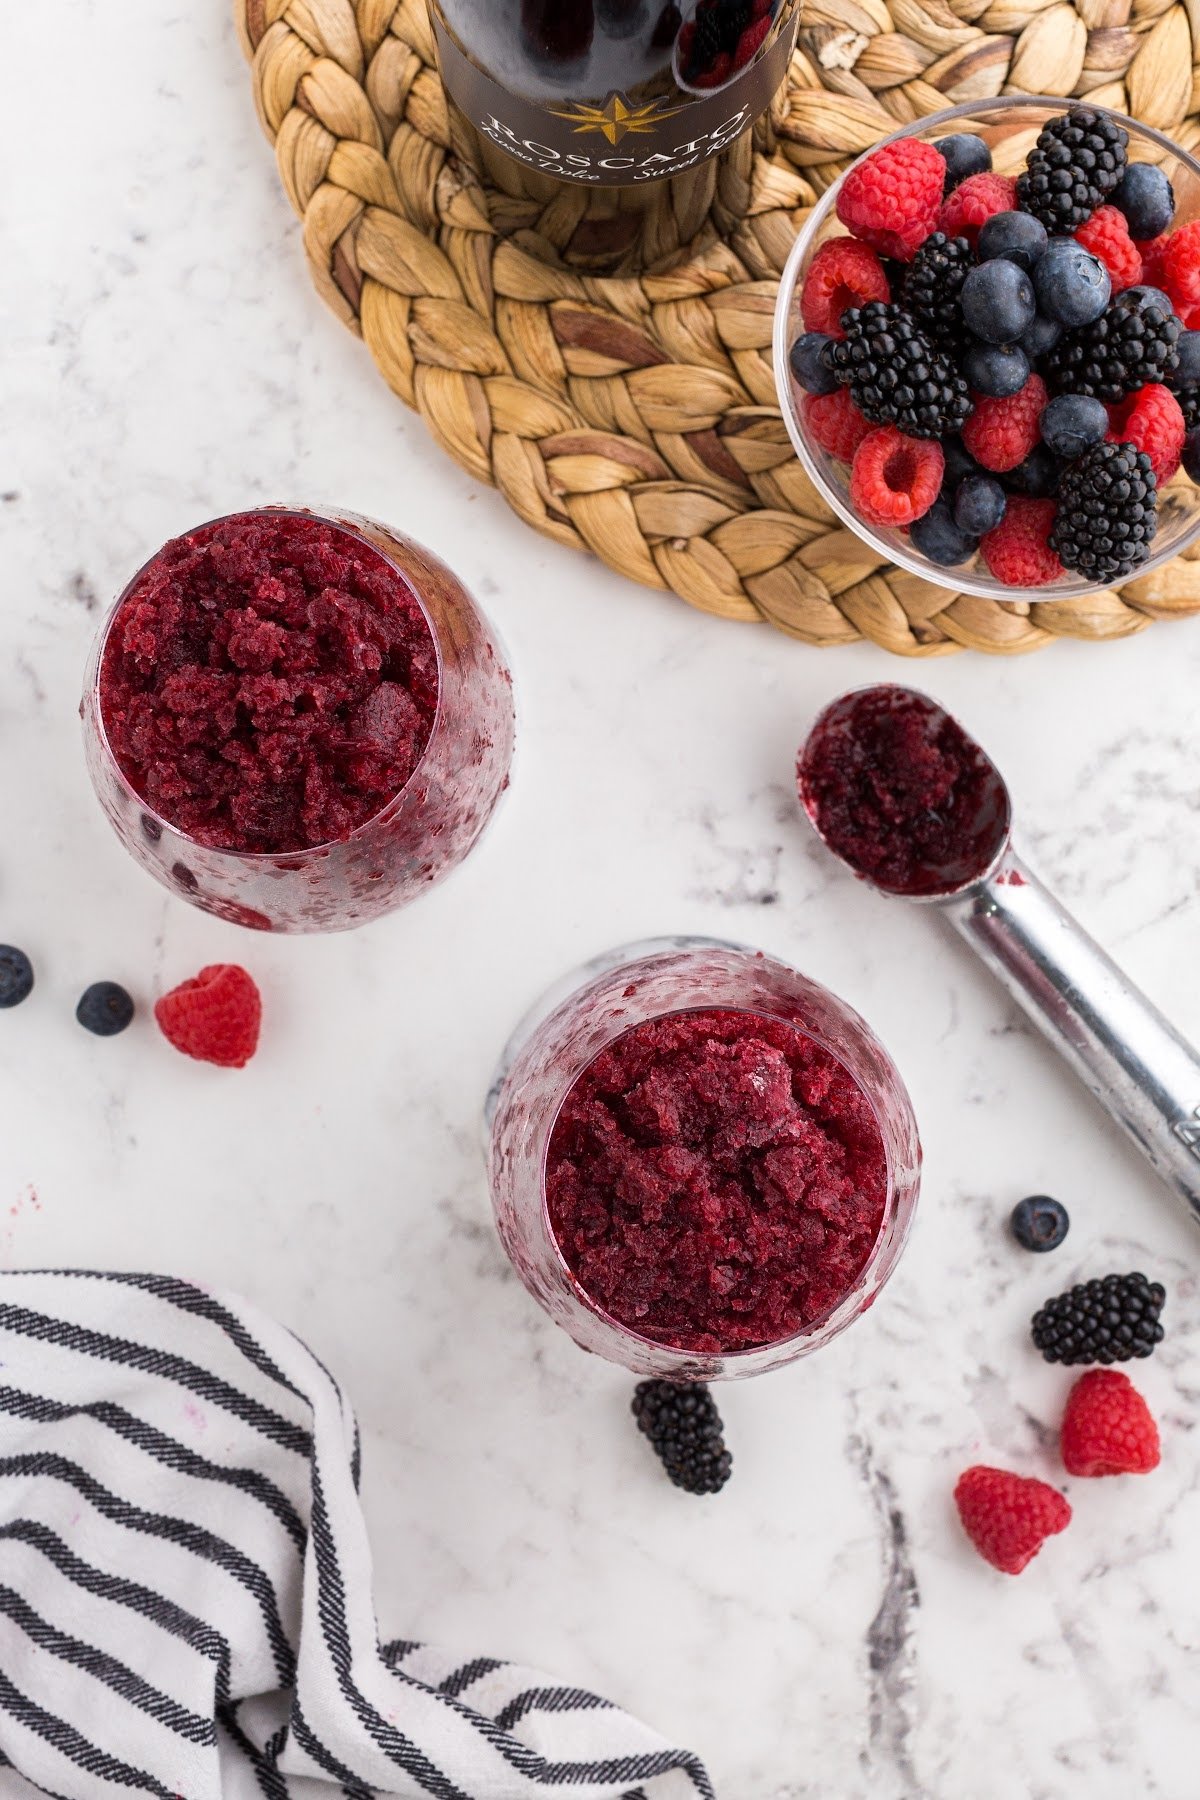 Overhead view of two Frozen Wine Slushies next to berries and wine.